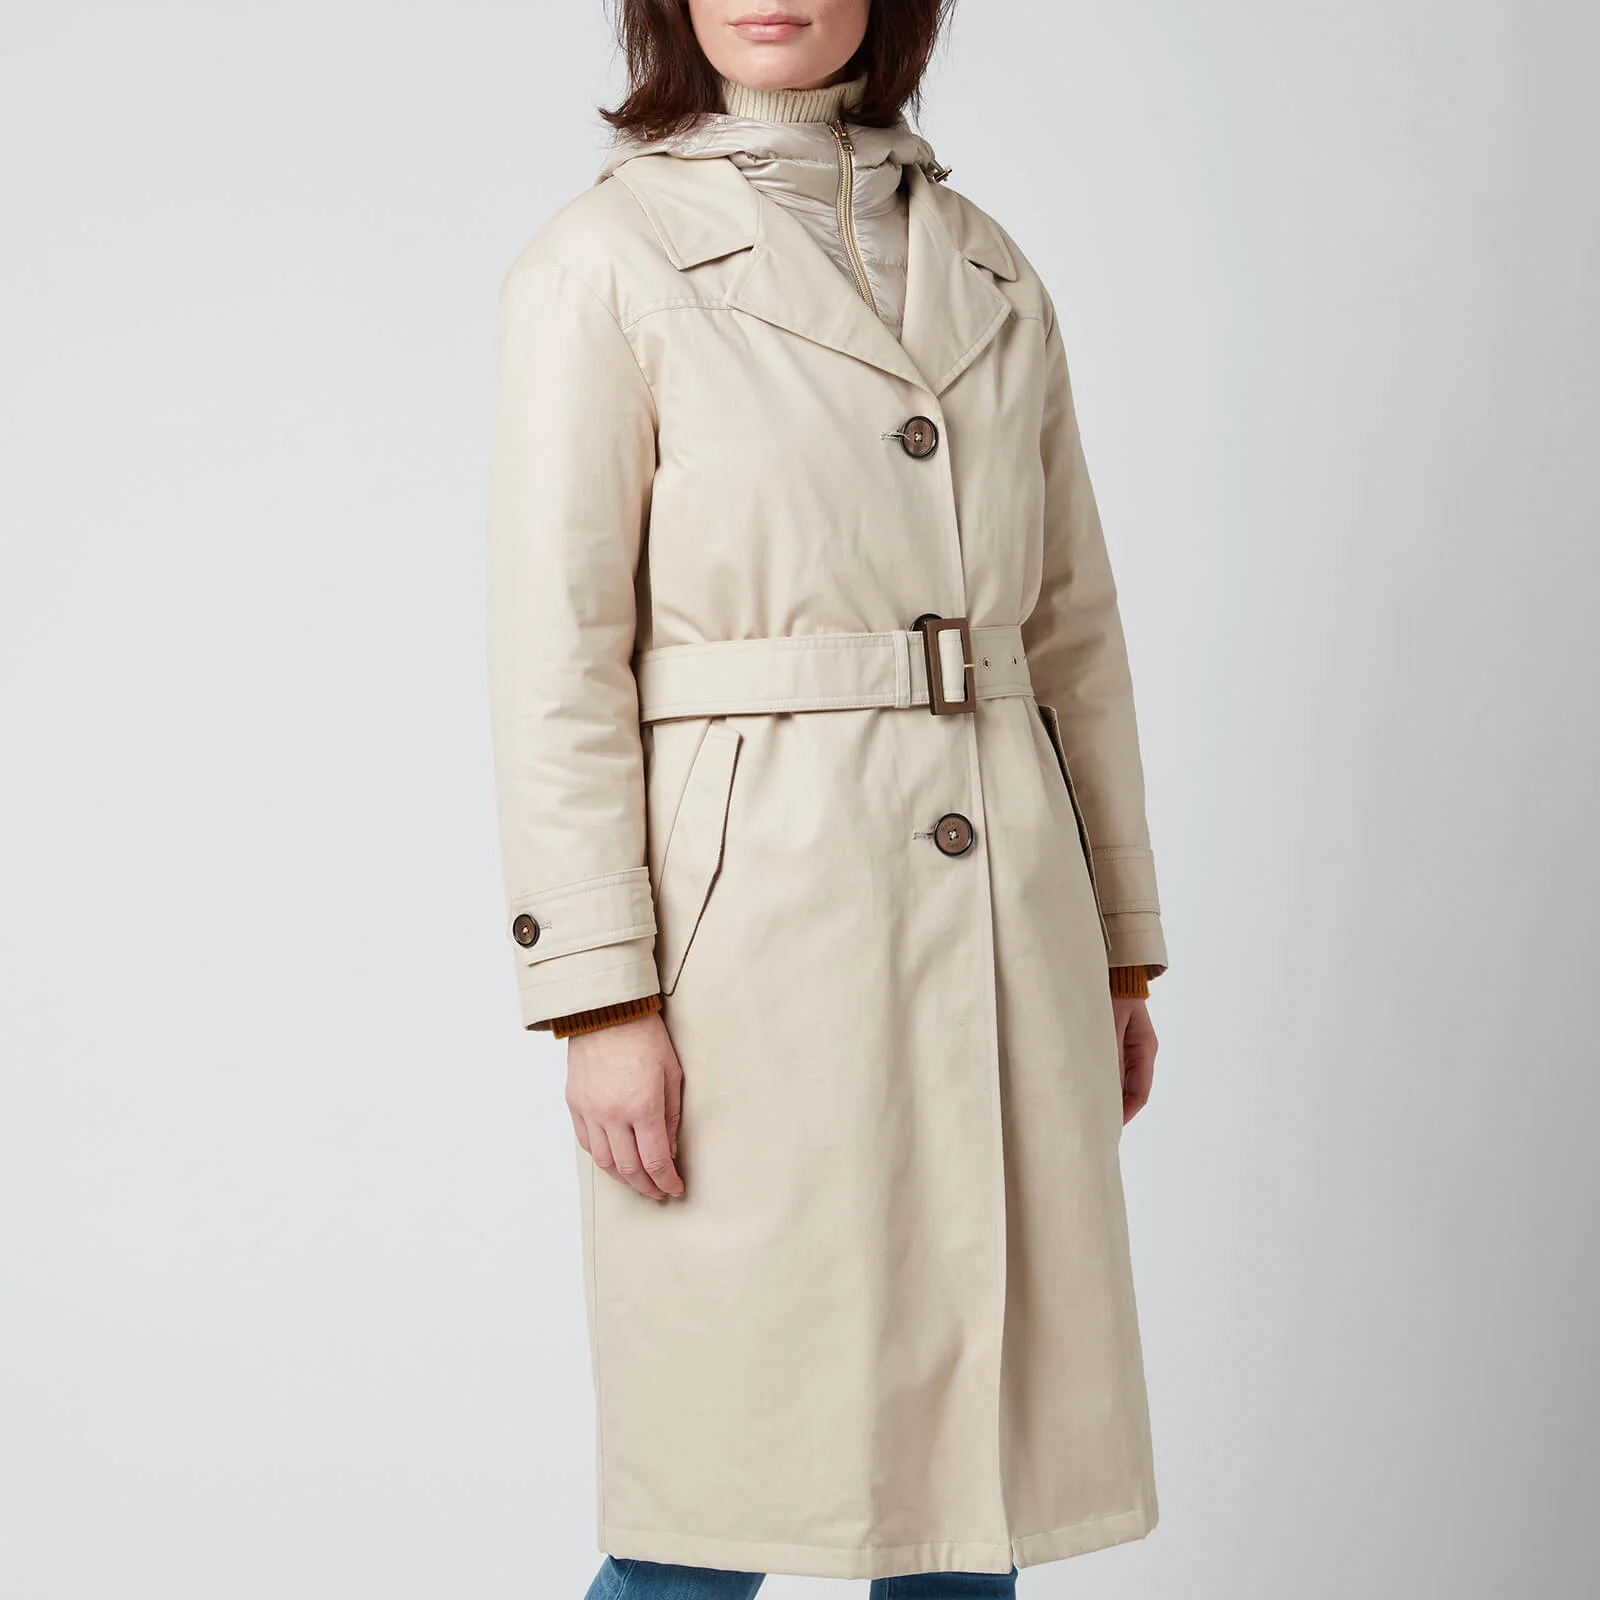 Herno Women's Hooded Trench Coat - Chantilly Image 1